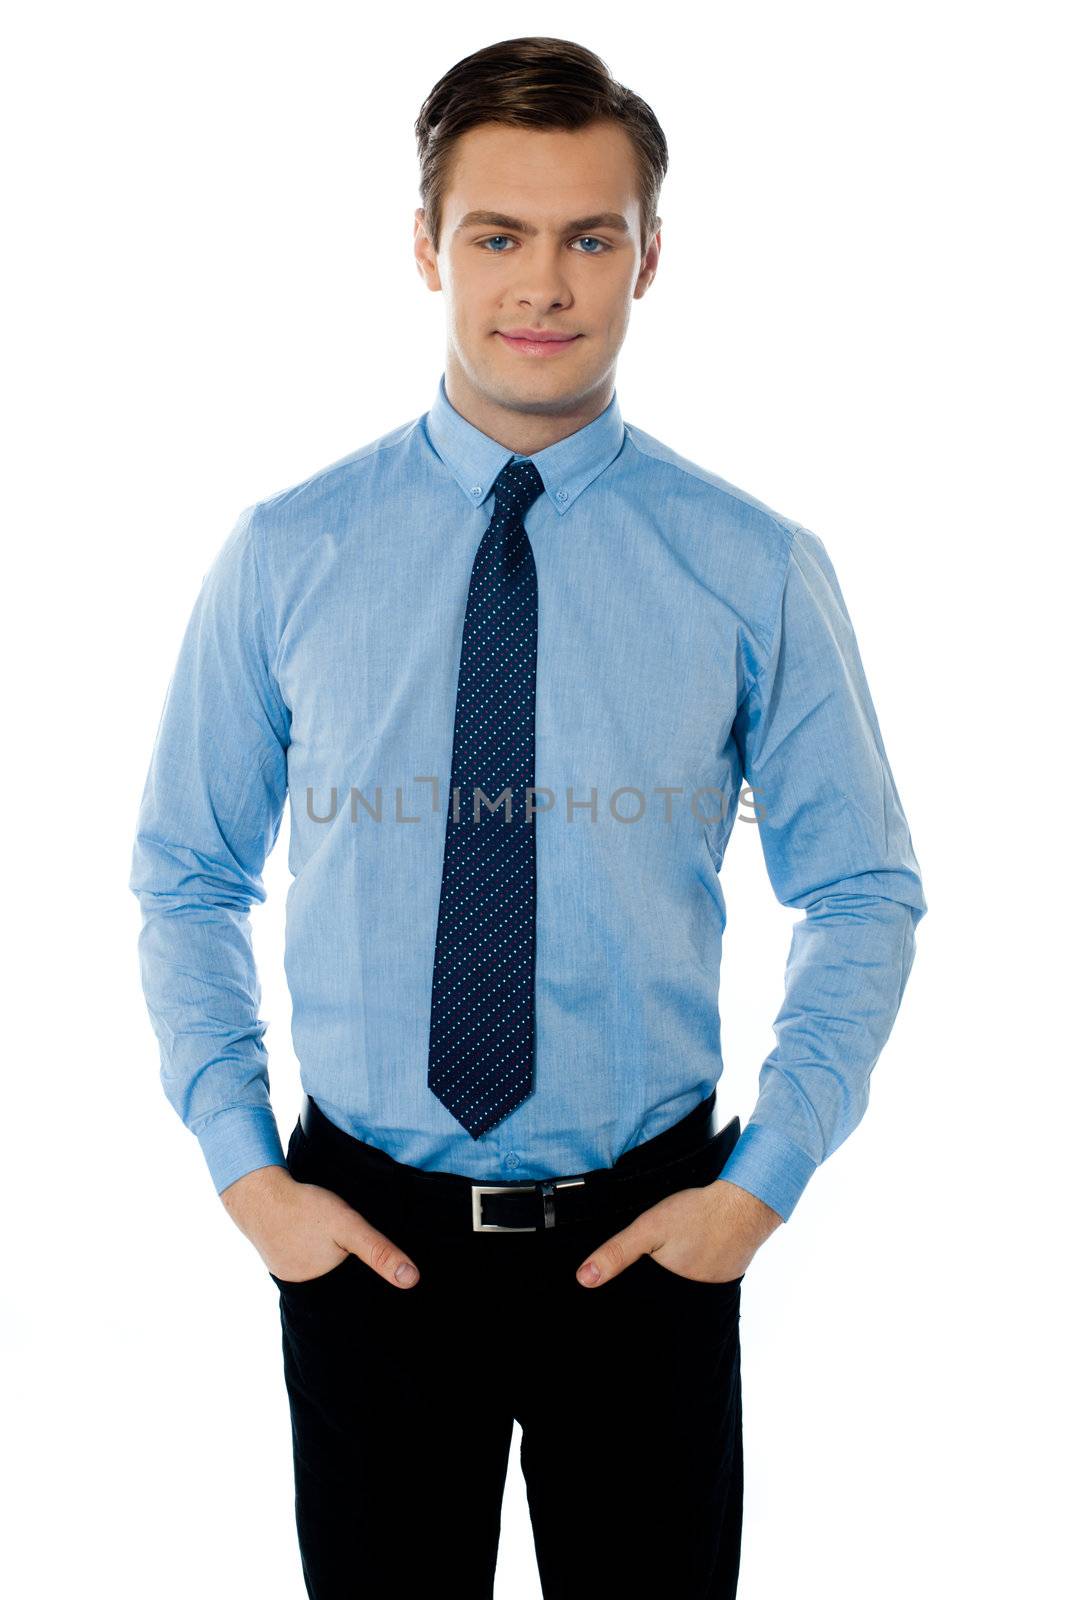 Businessman posing with hands in his pockets on white background